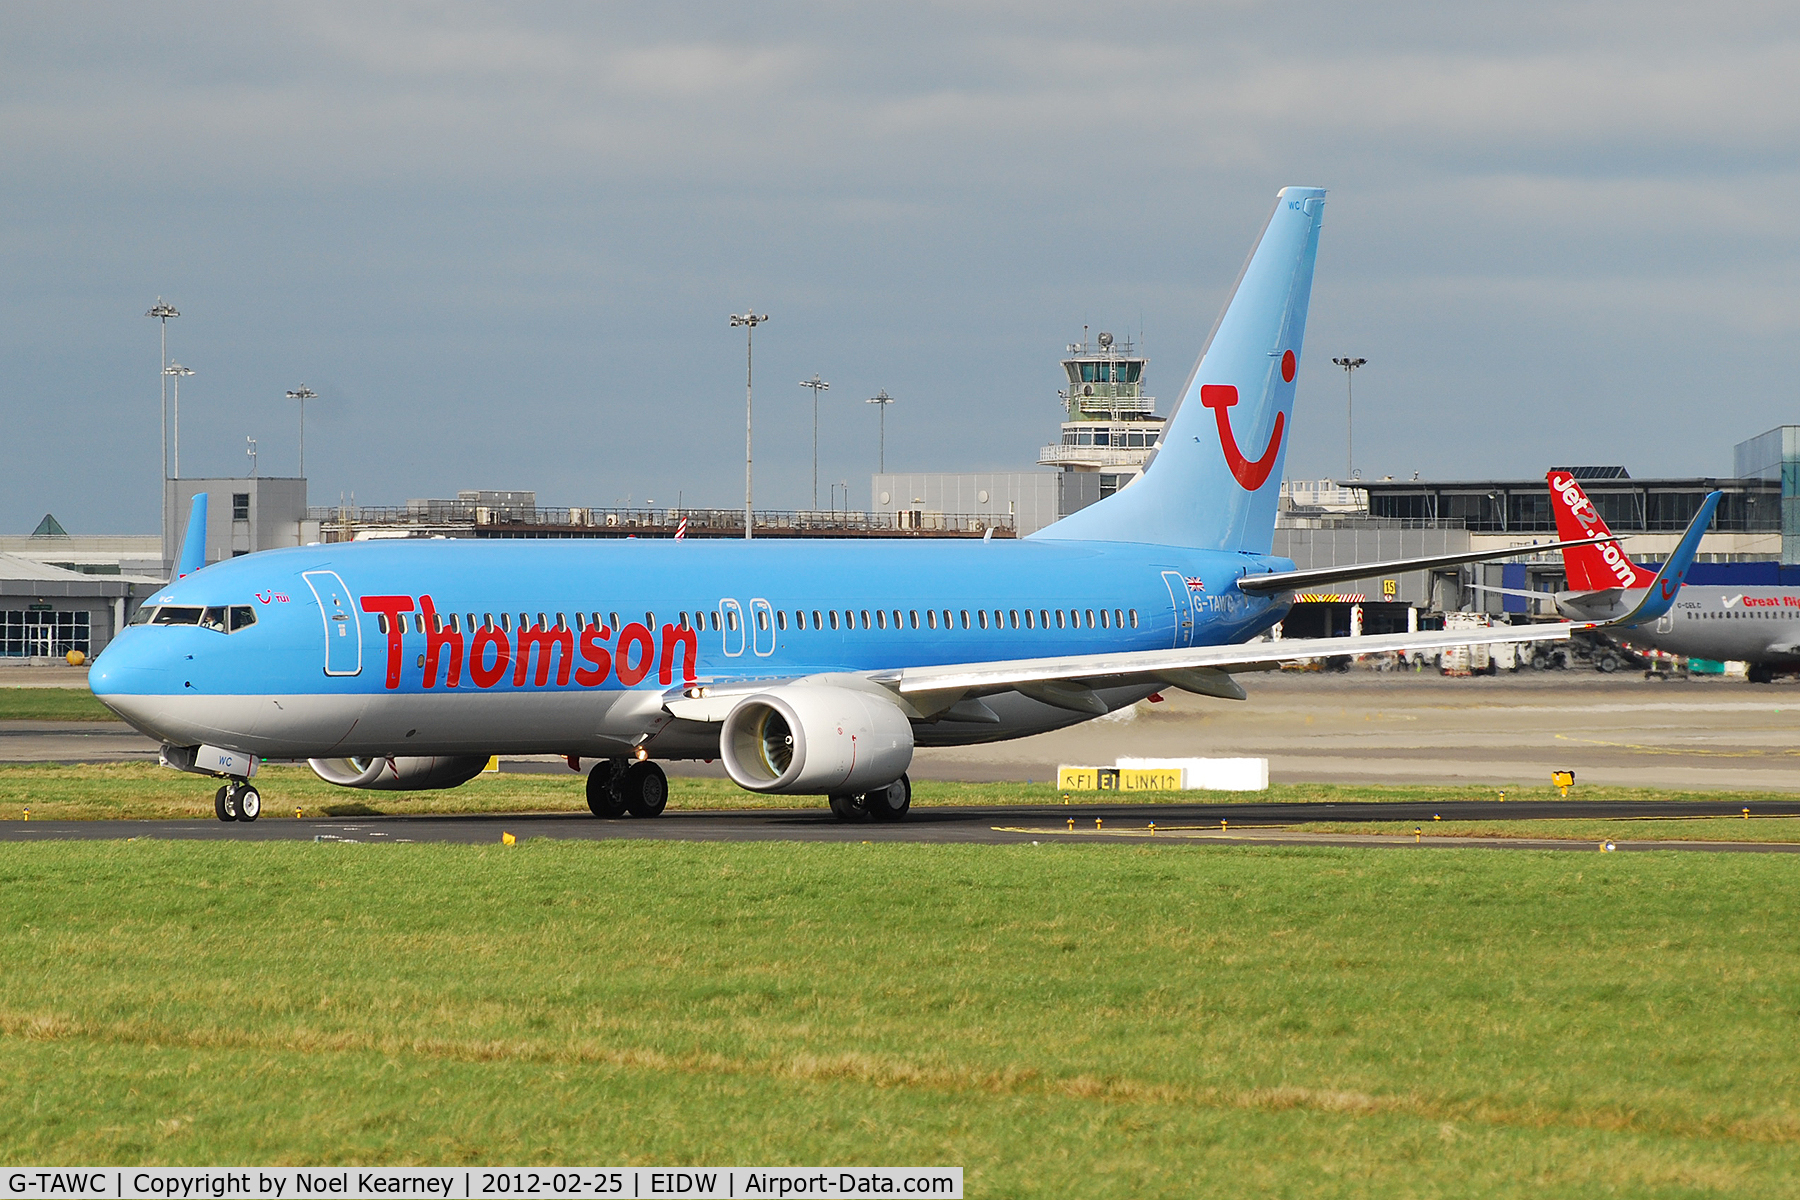 G-TAWC, 2012 Boeing 737-8K5 C/N 39922, Operating TOM7TC and about to depart off Rwy 28